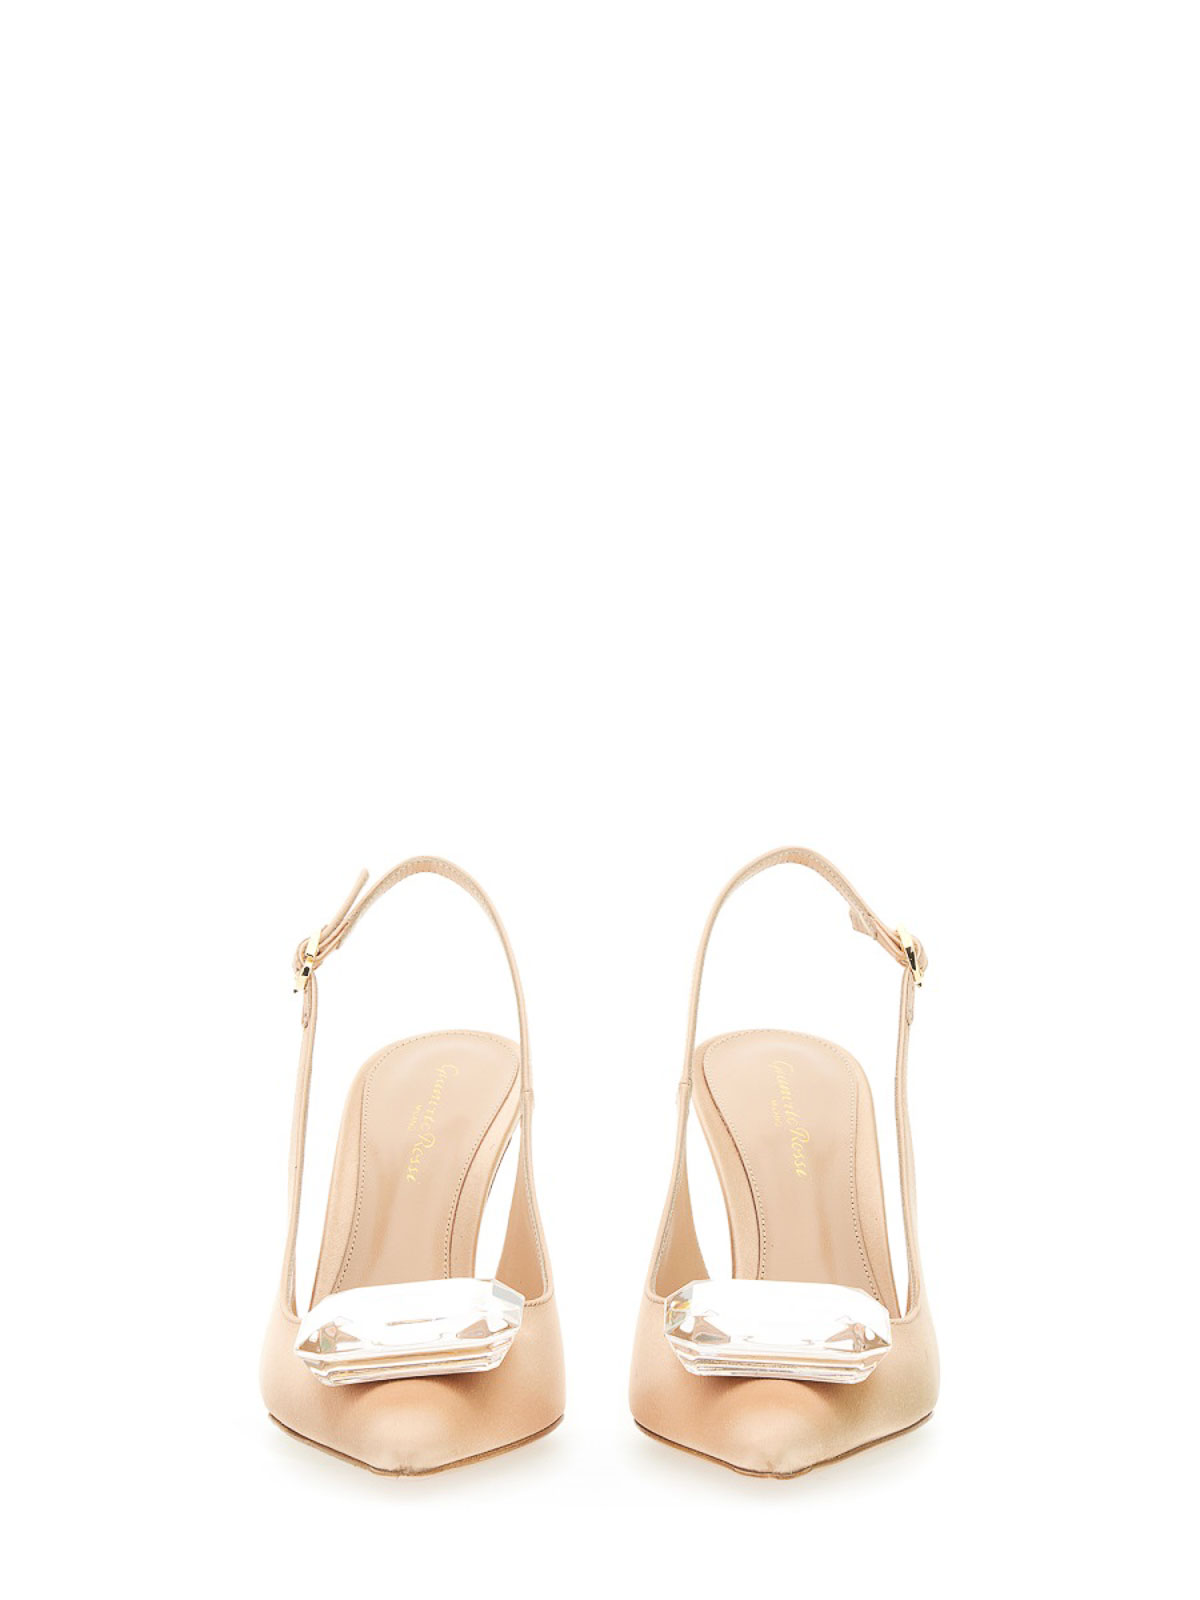 Shop Gianvito Rossi Jaipur Sandals In Light Pink